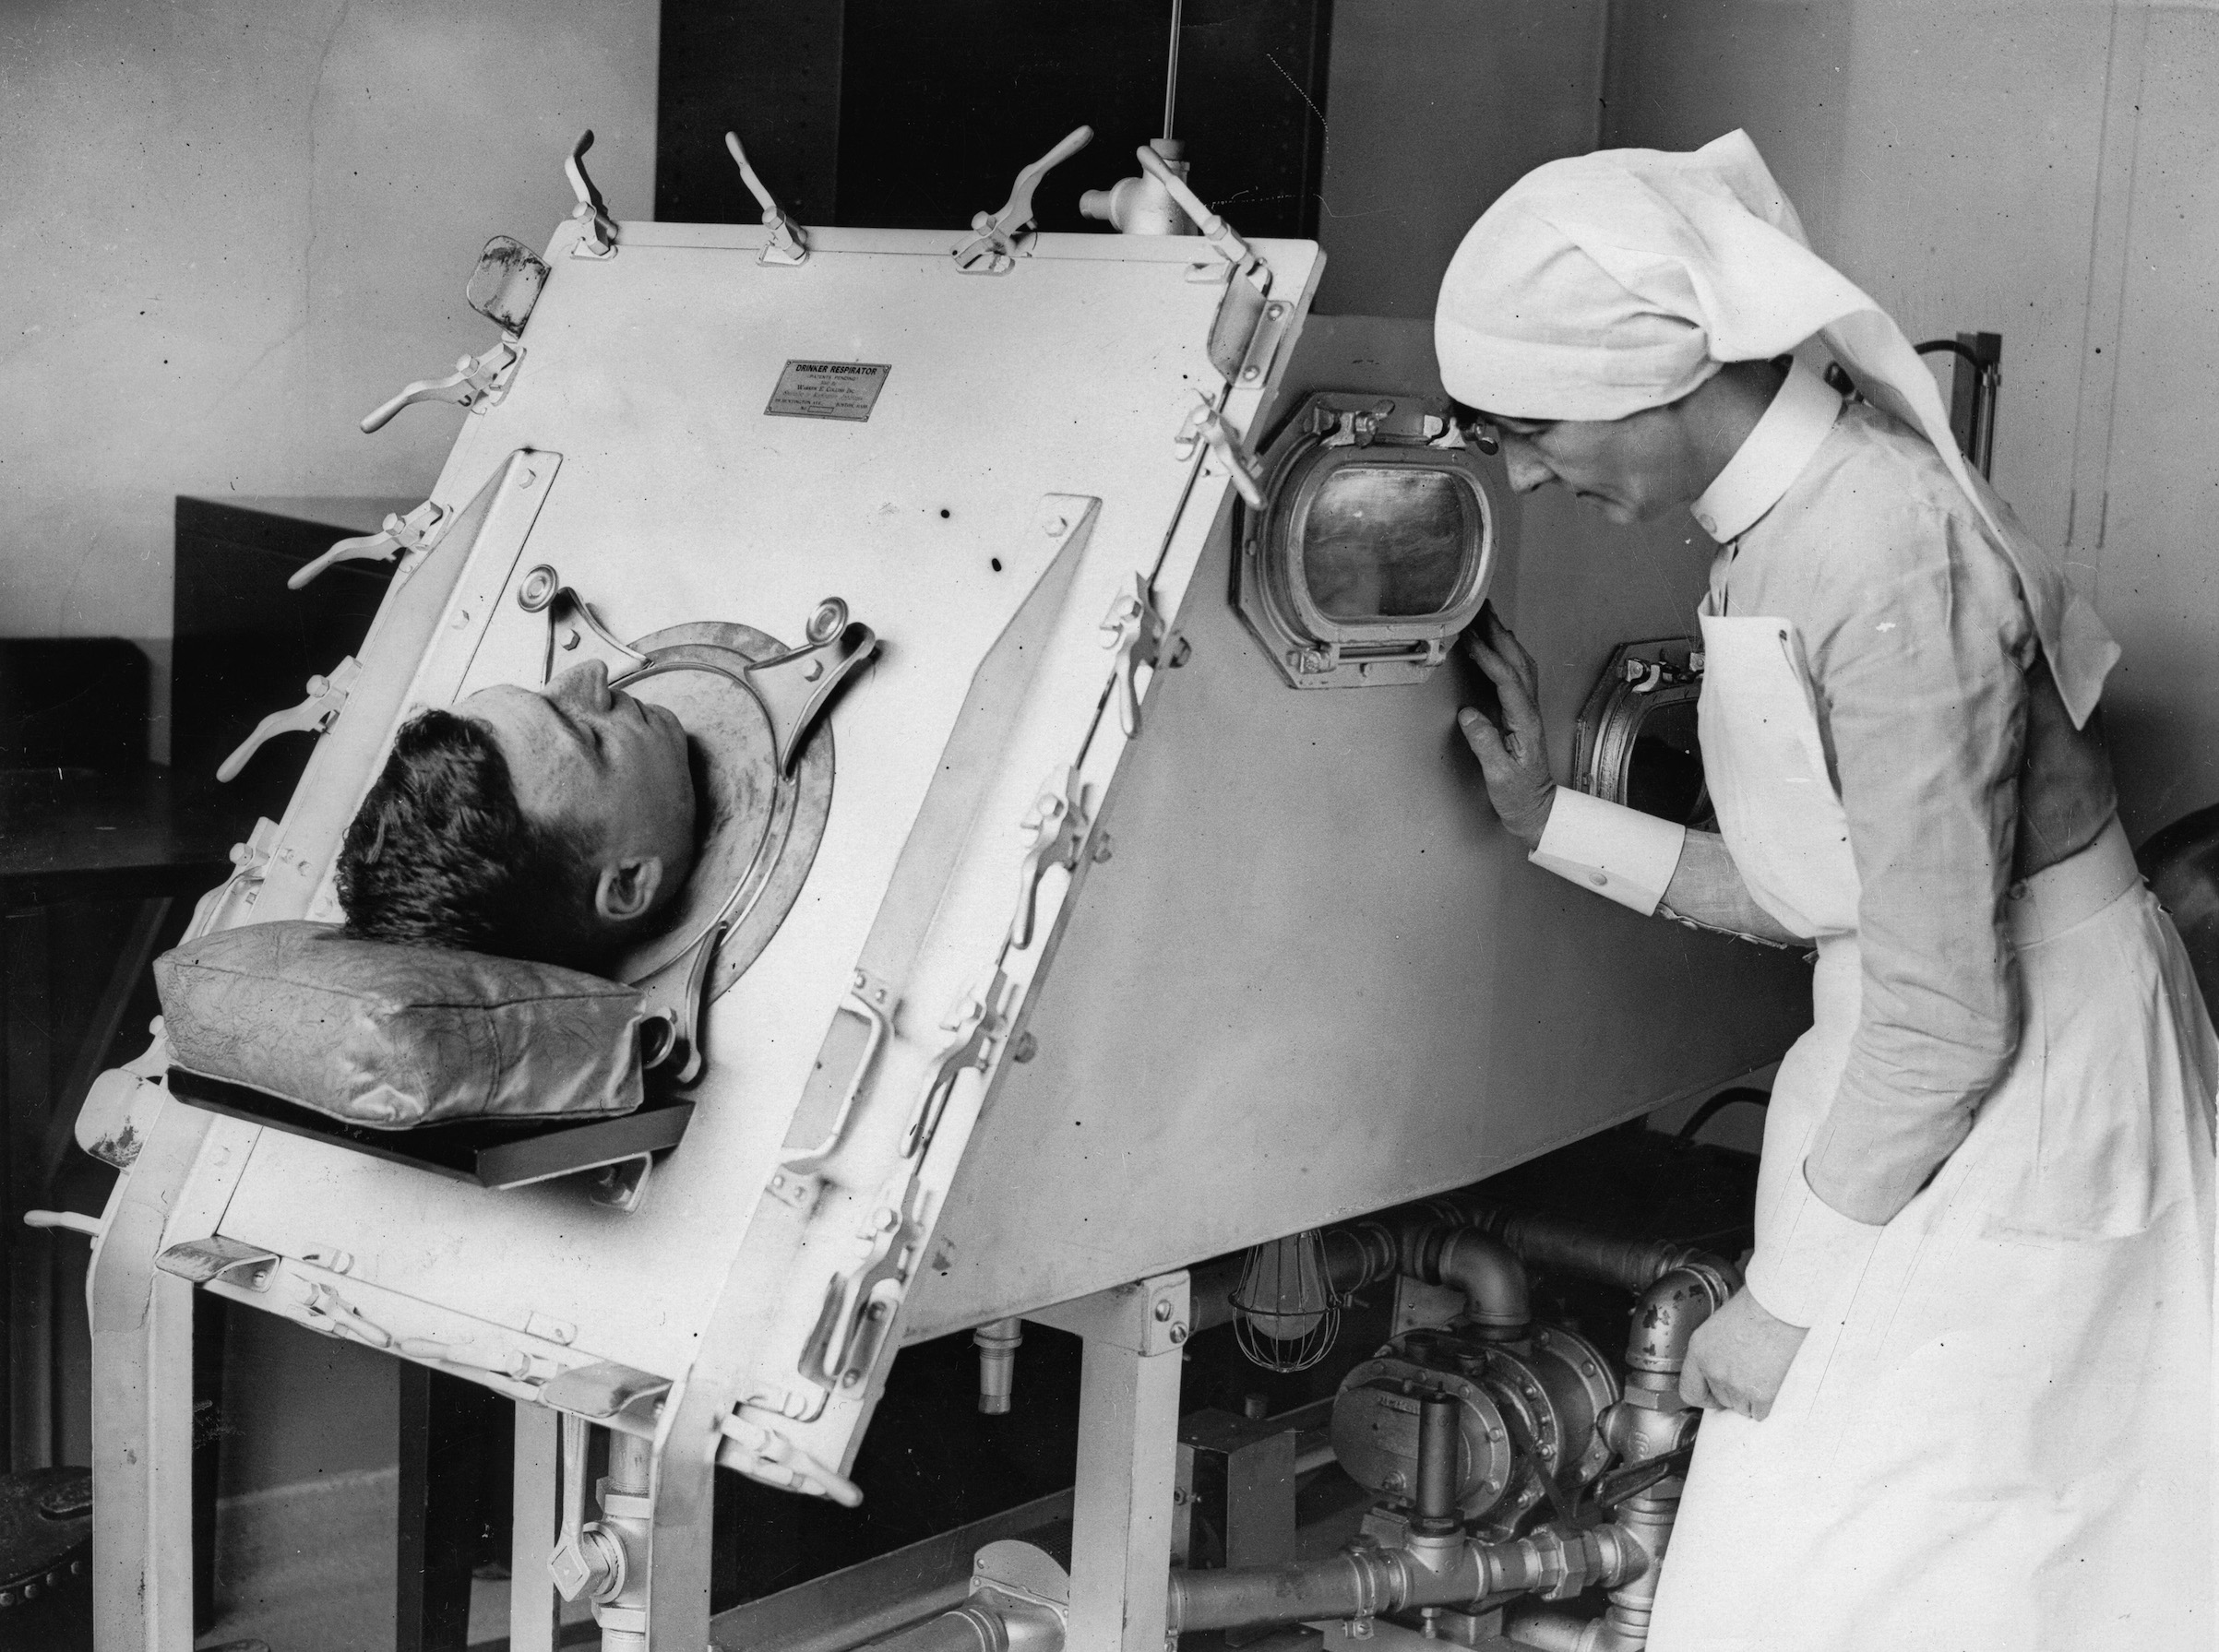 An iron lung at St. Bartholomews Hospital. London. About 1935.